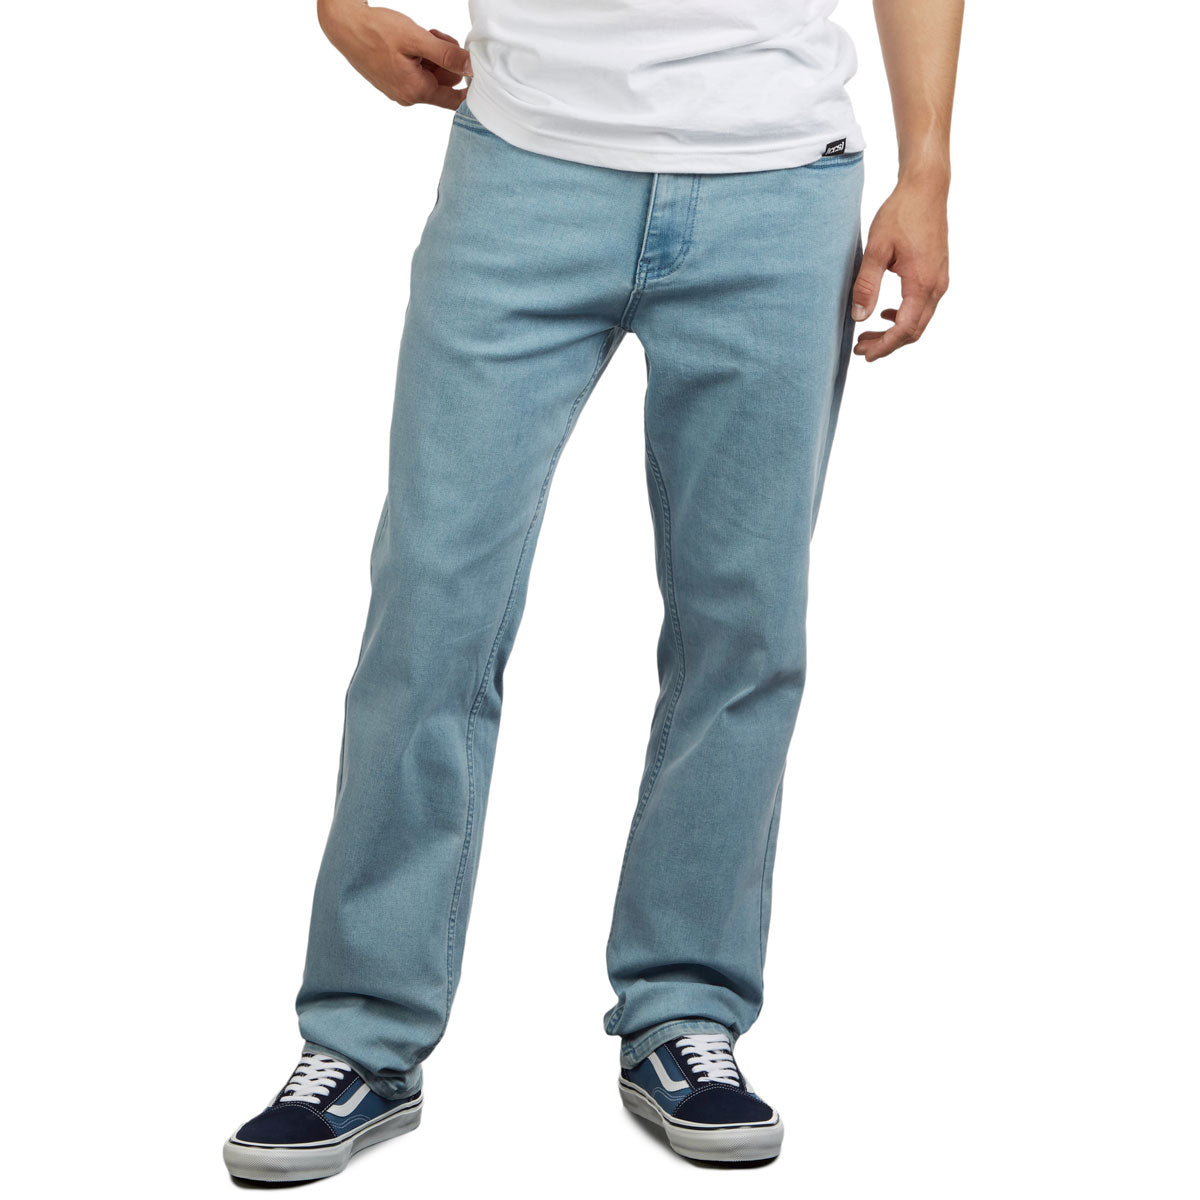 CCS Standard Plus Relaxed Denim Jeans - New Wash image 1